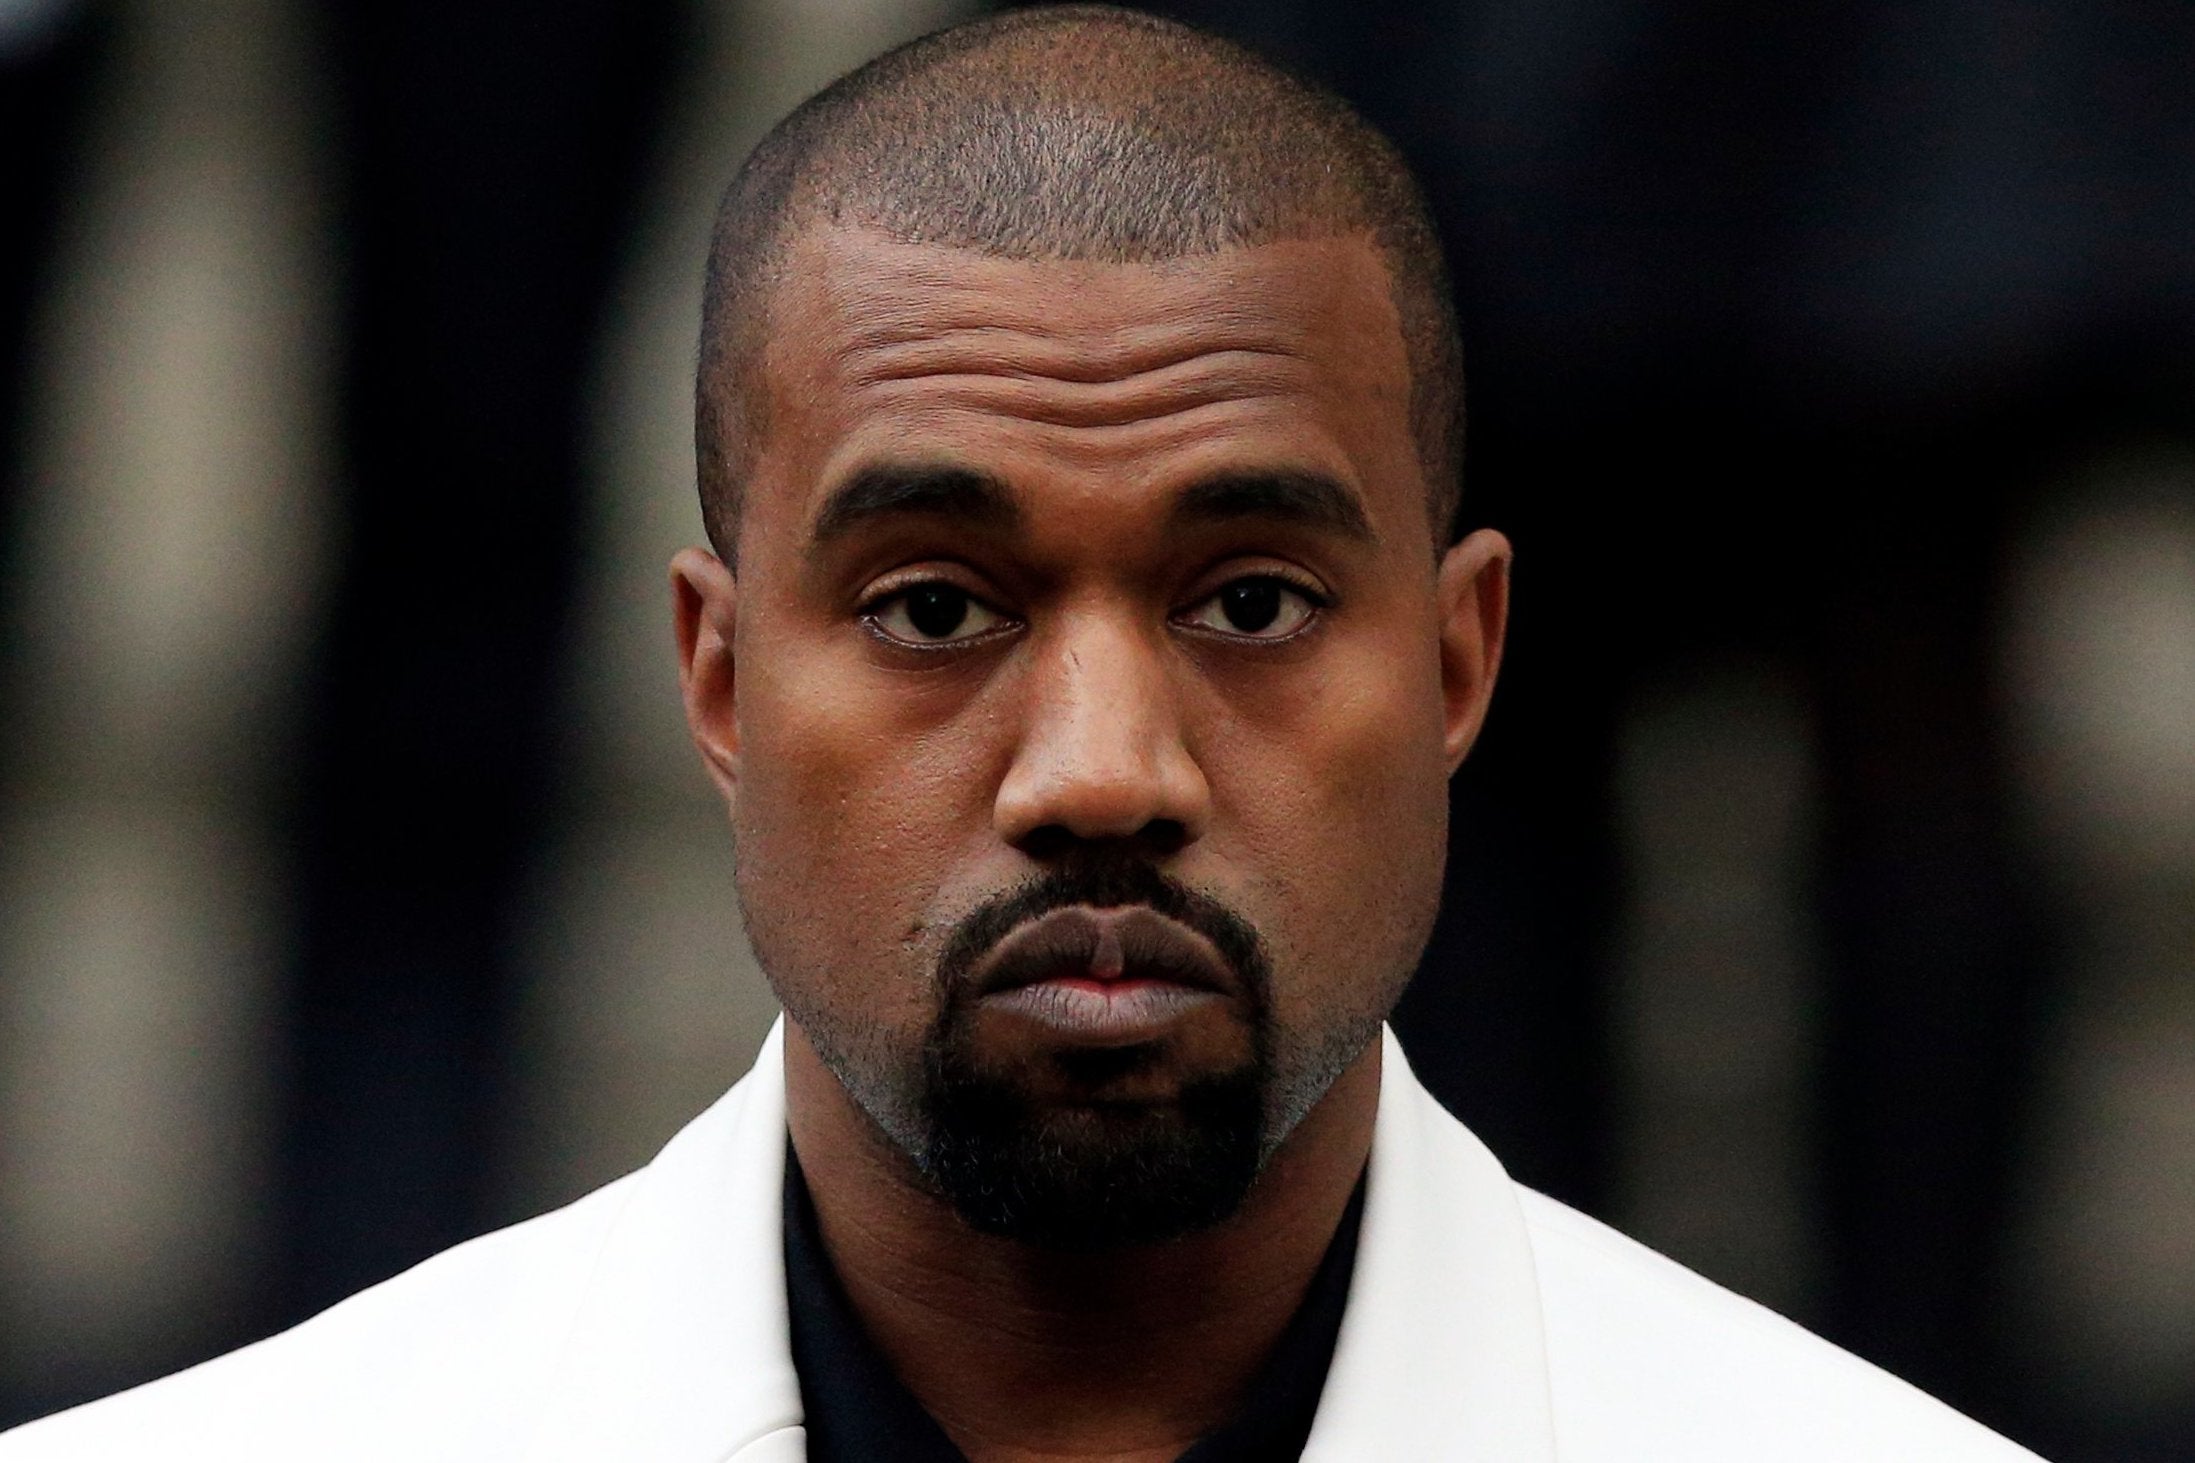 Kanye West New Song With Lil Pump Appears Online After Debuting At The Pornhub Awards The Independent The Independent - kanye west a lil pump ft adele givens i love it roblox youtube